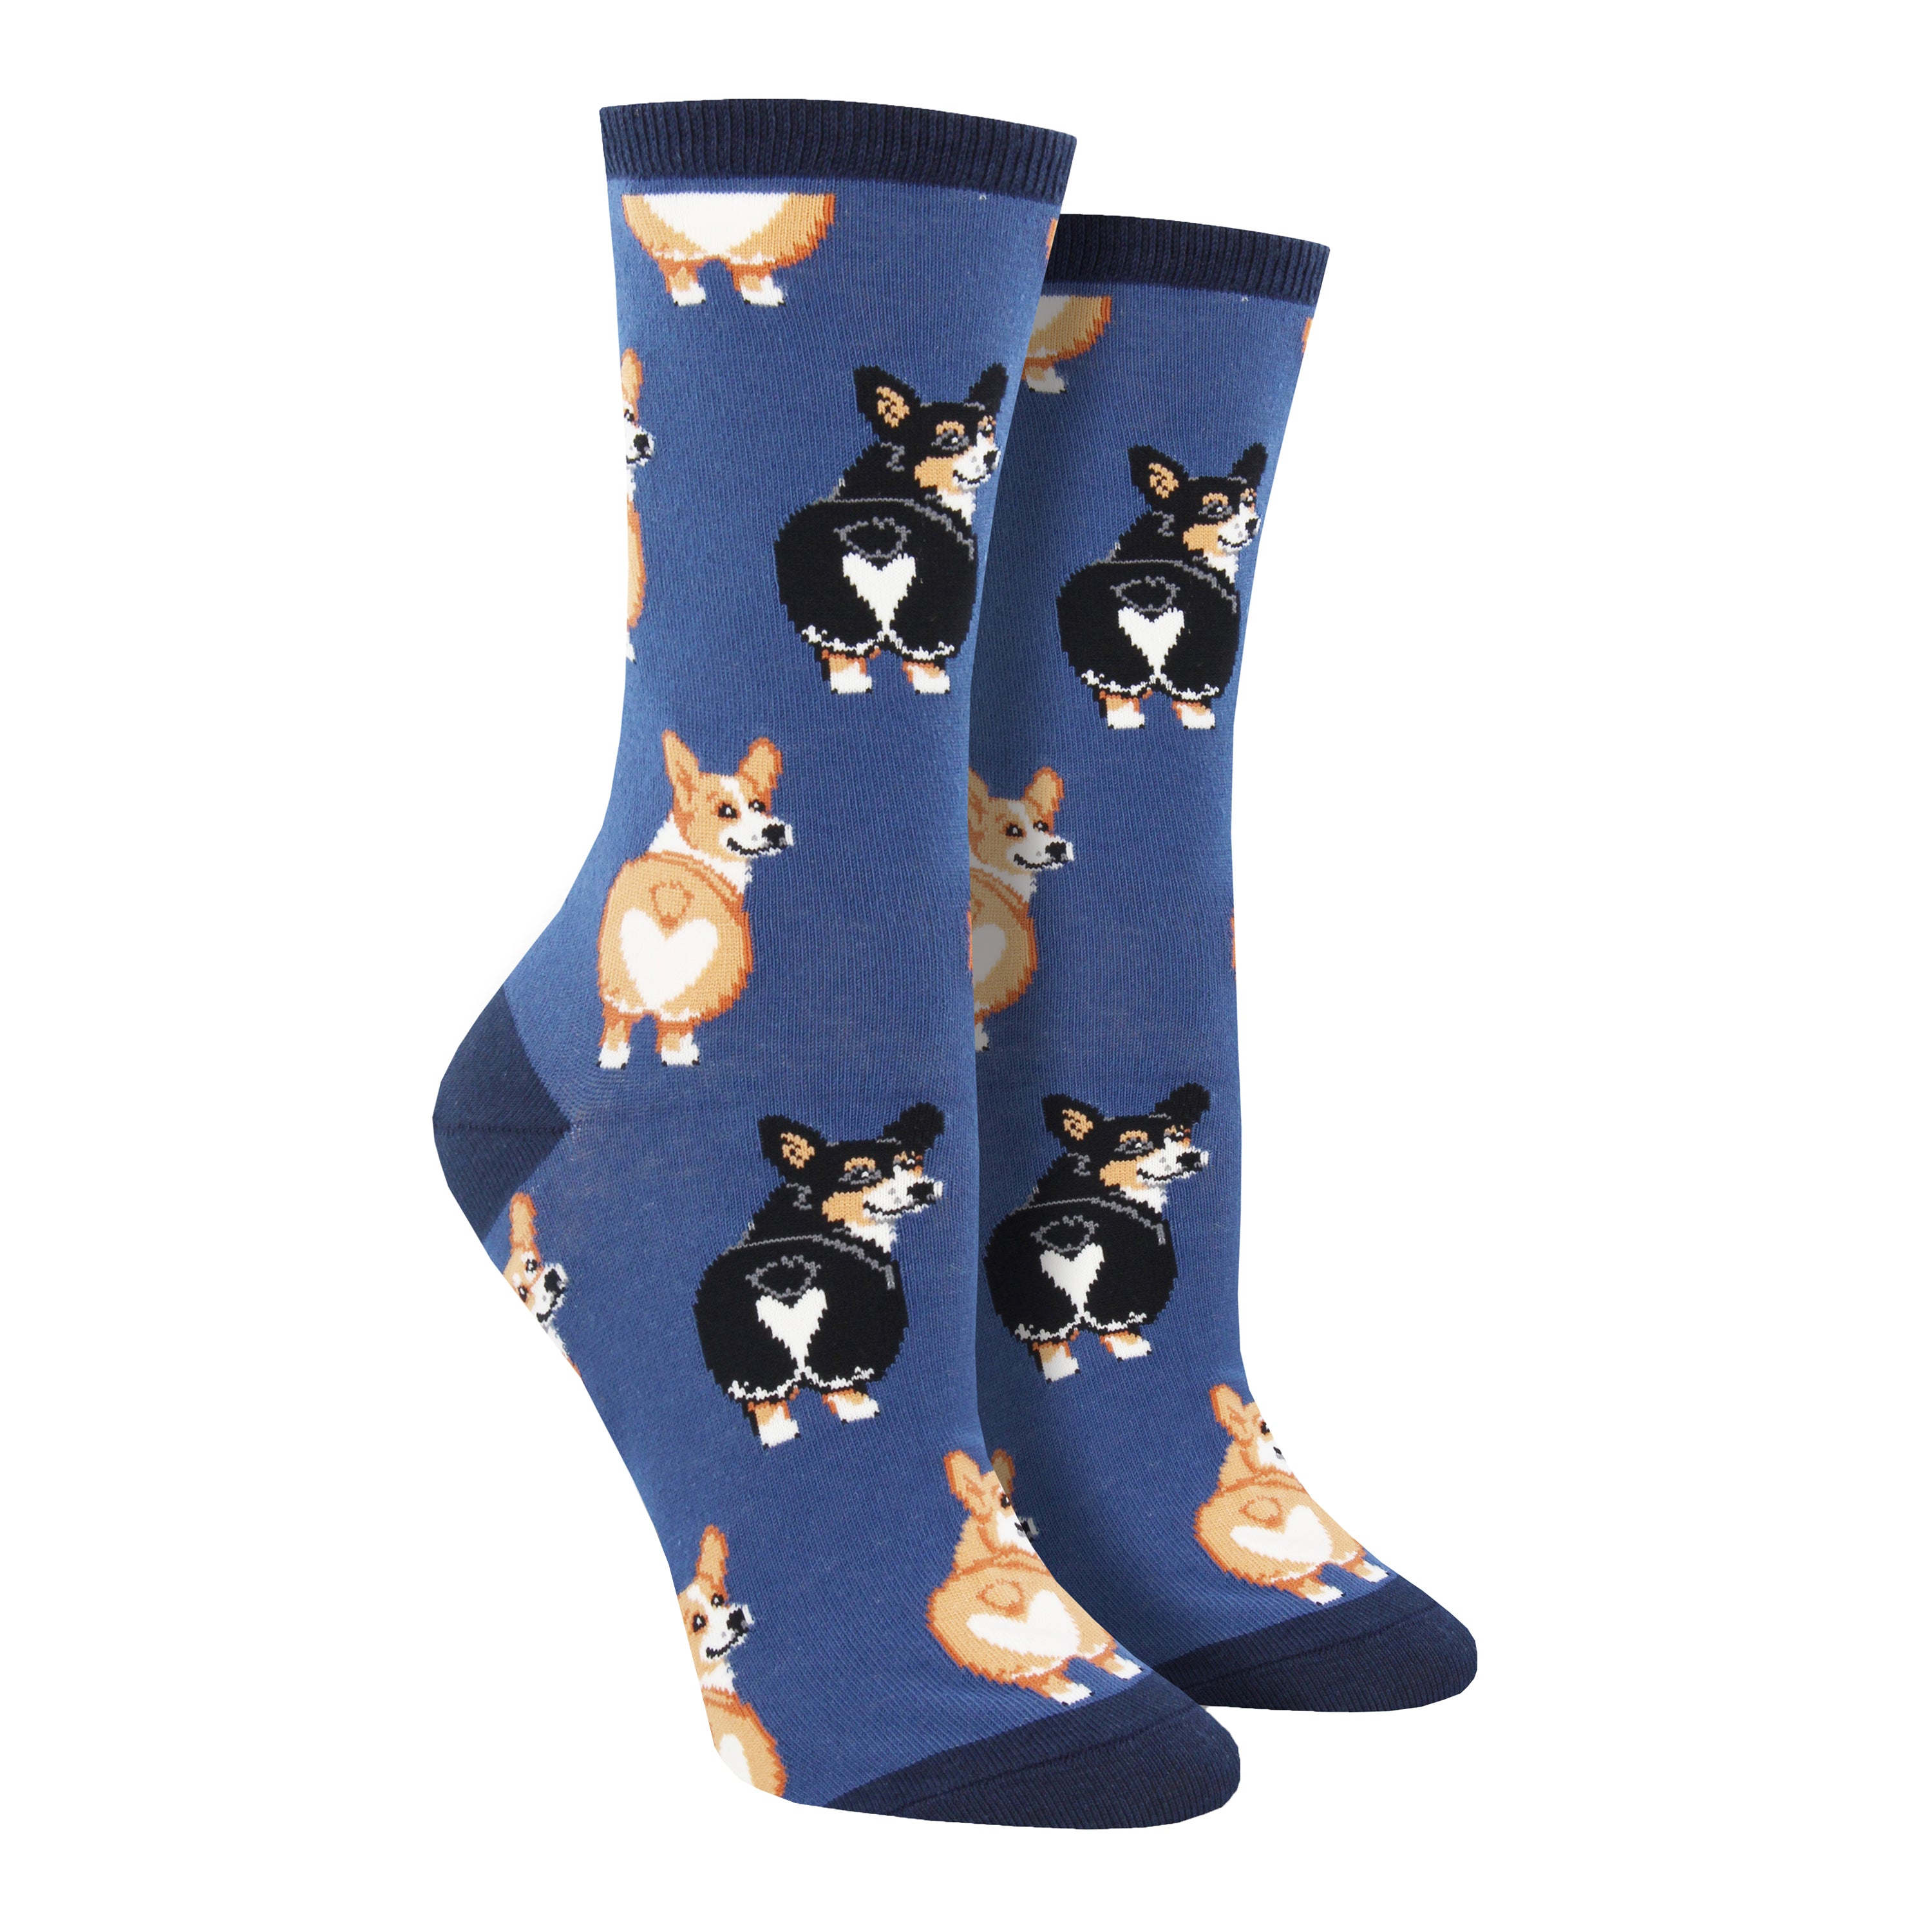 Shown on leg forms, a pair of Sock Smith brand women's cotton crew socks in blue with a navy blue heel, toe, and cuff. The sock features an all over motif of blonde and black corgi dogs with their little heart shaped butts facing out.